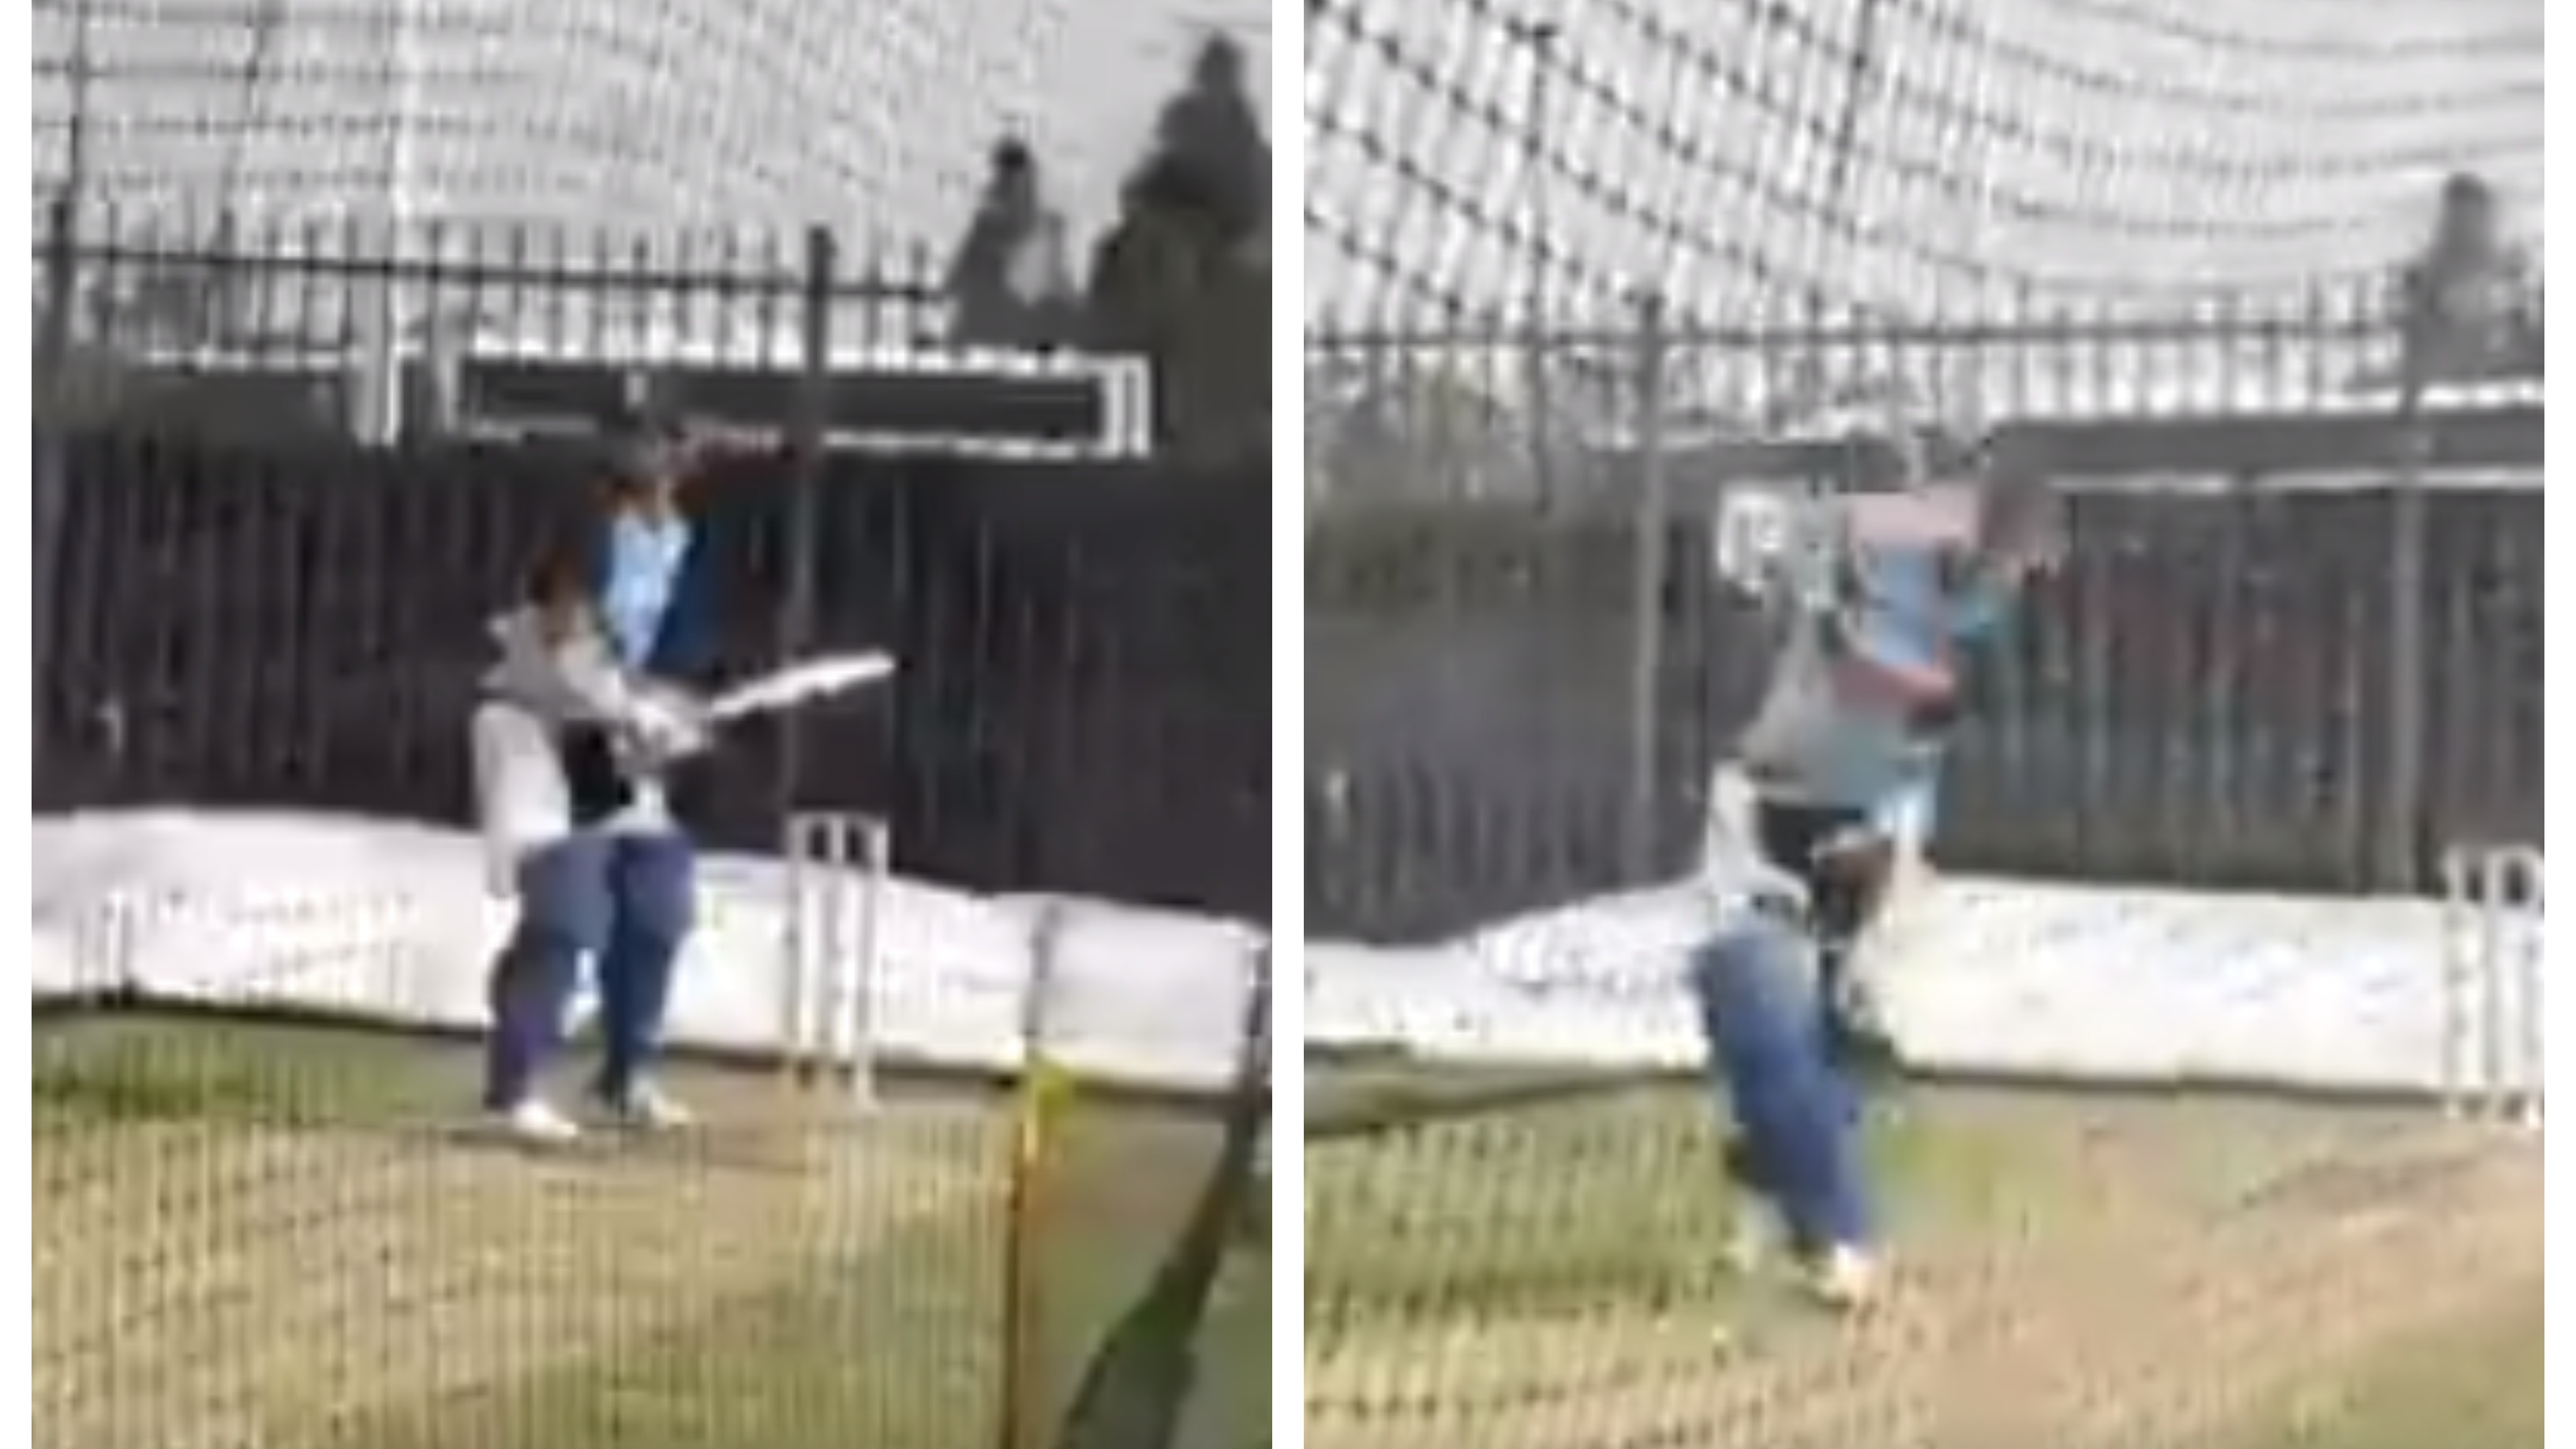 AUS v IND 2020-21: WATCH – Shikhar Dhawan sweats it out in the nets ahead of ODI series